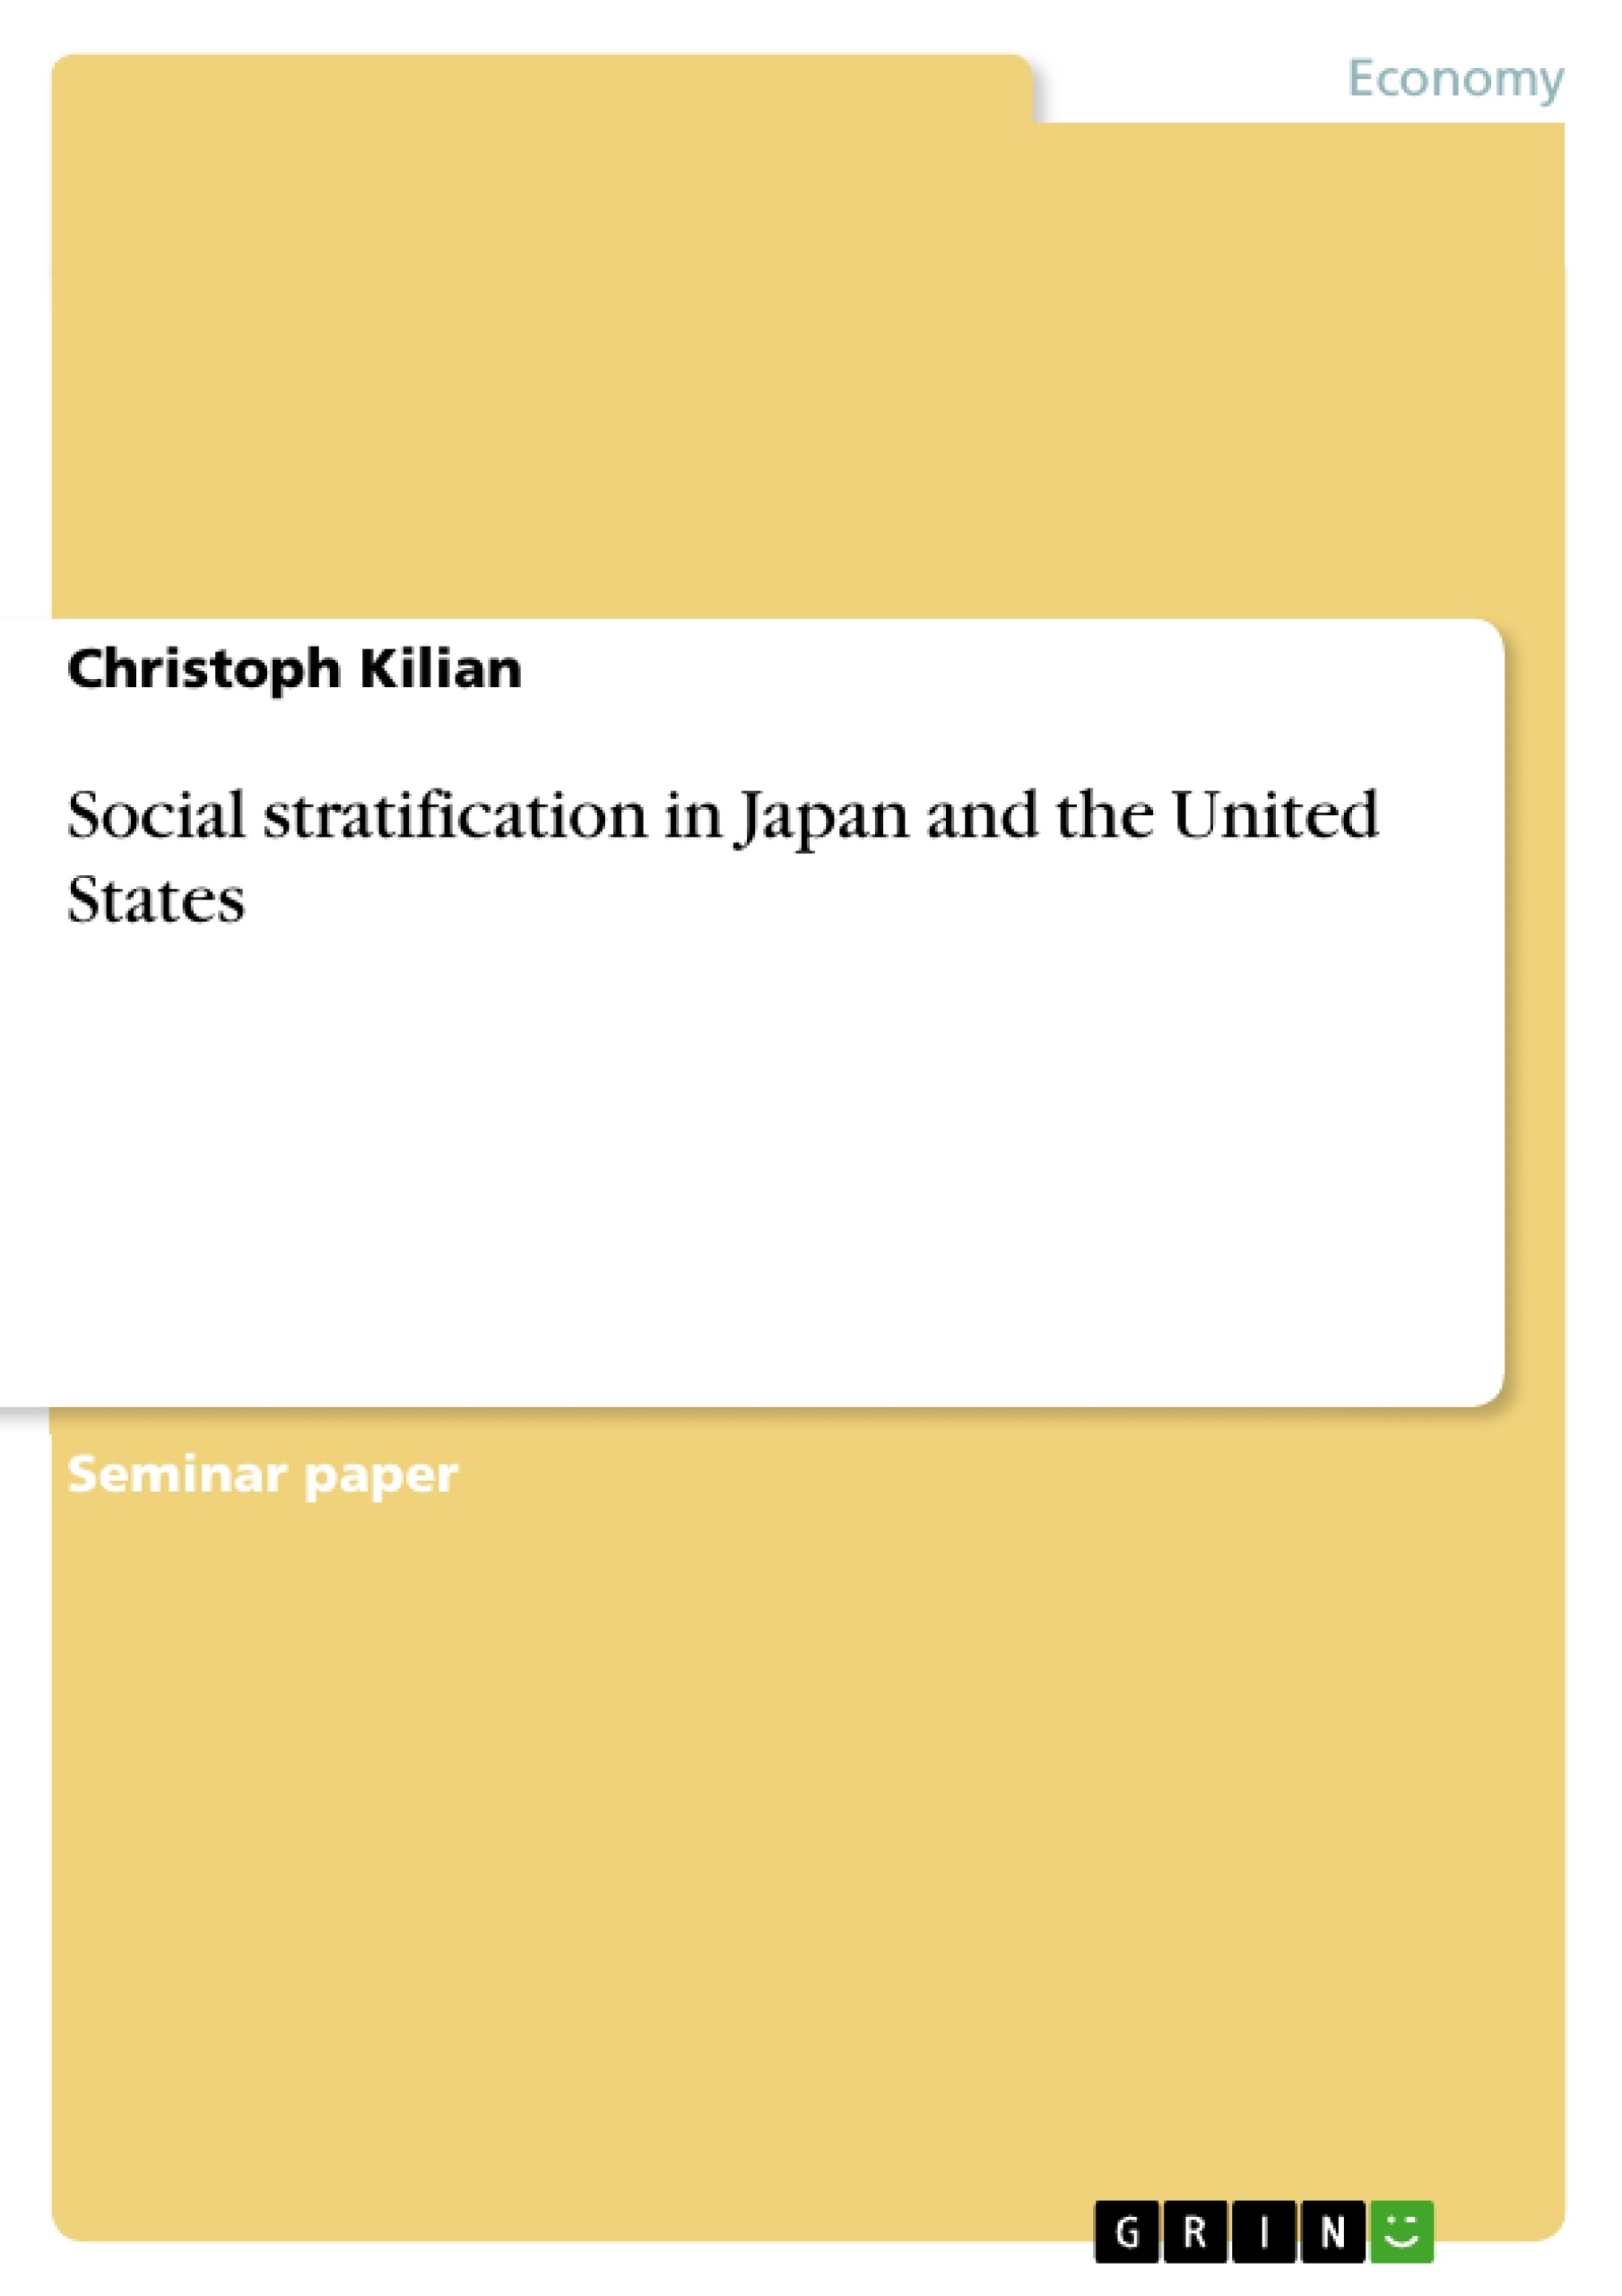 Title: Social stratification in Japan and the United States